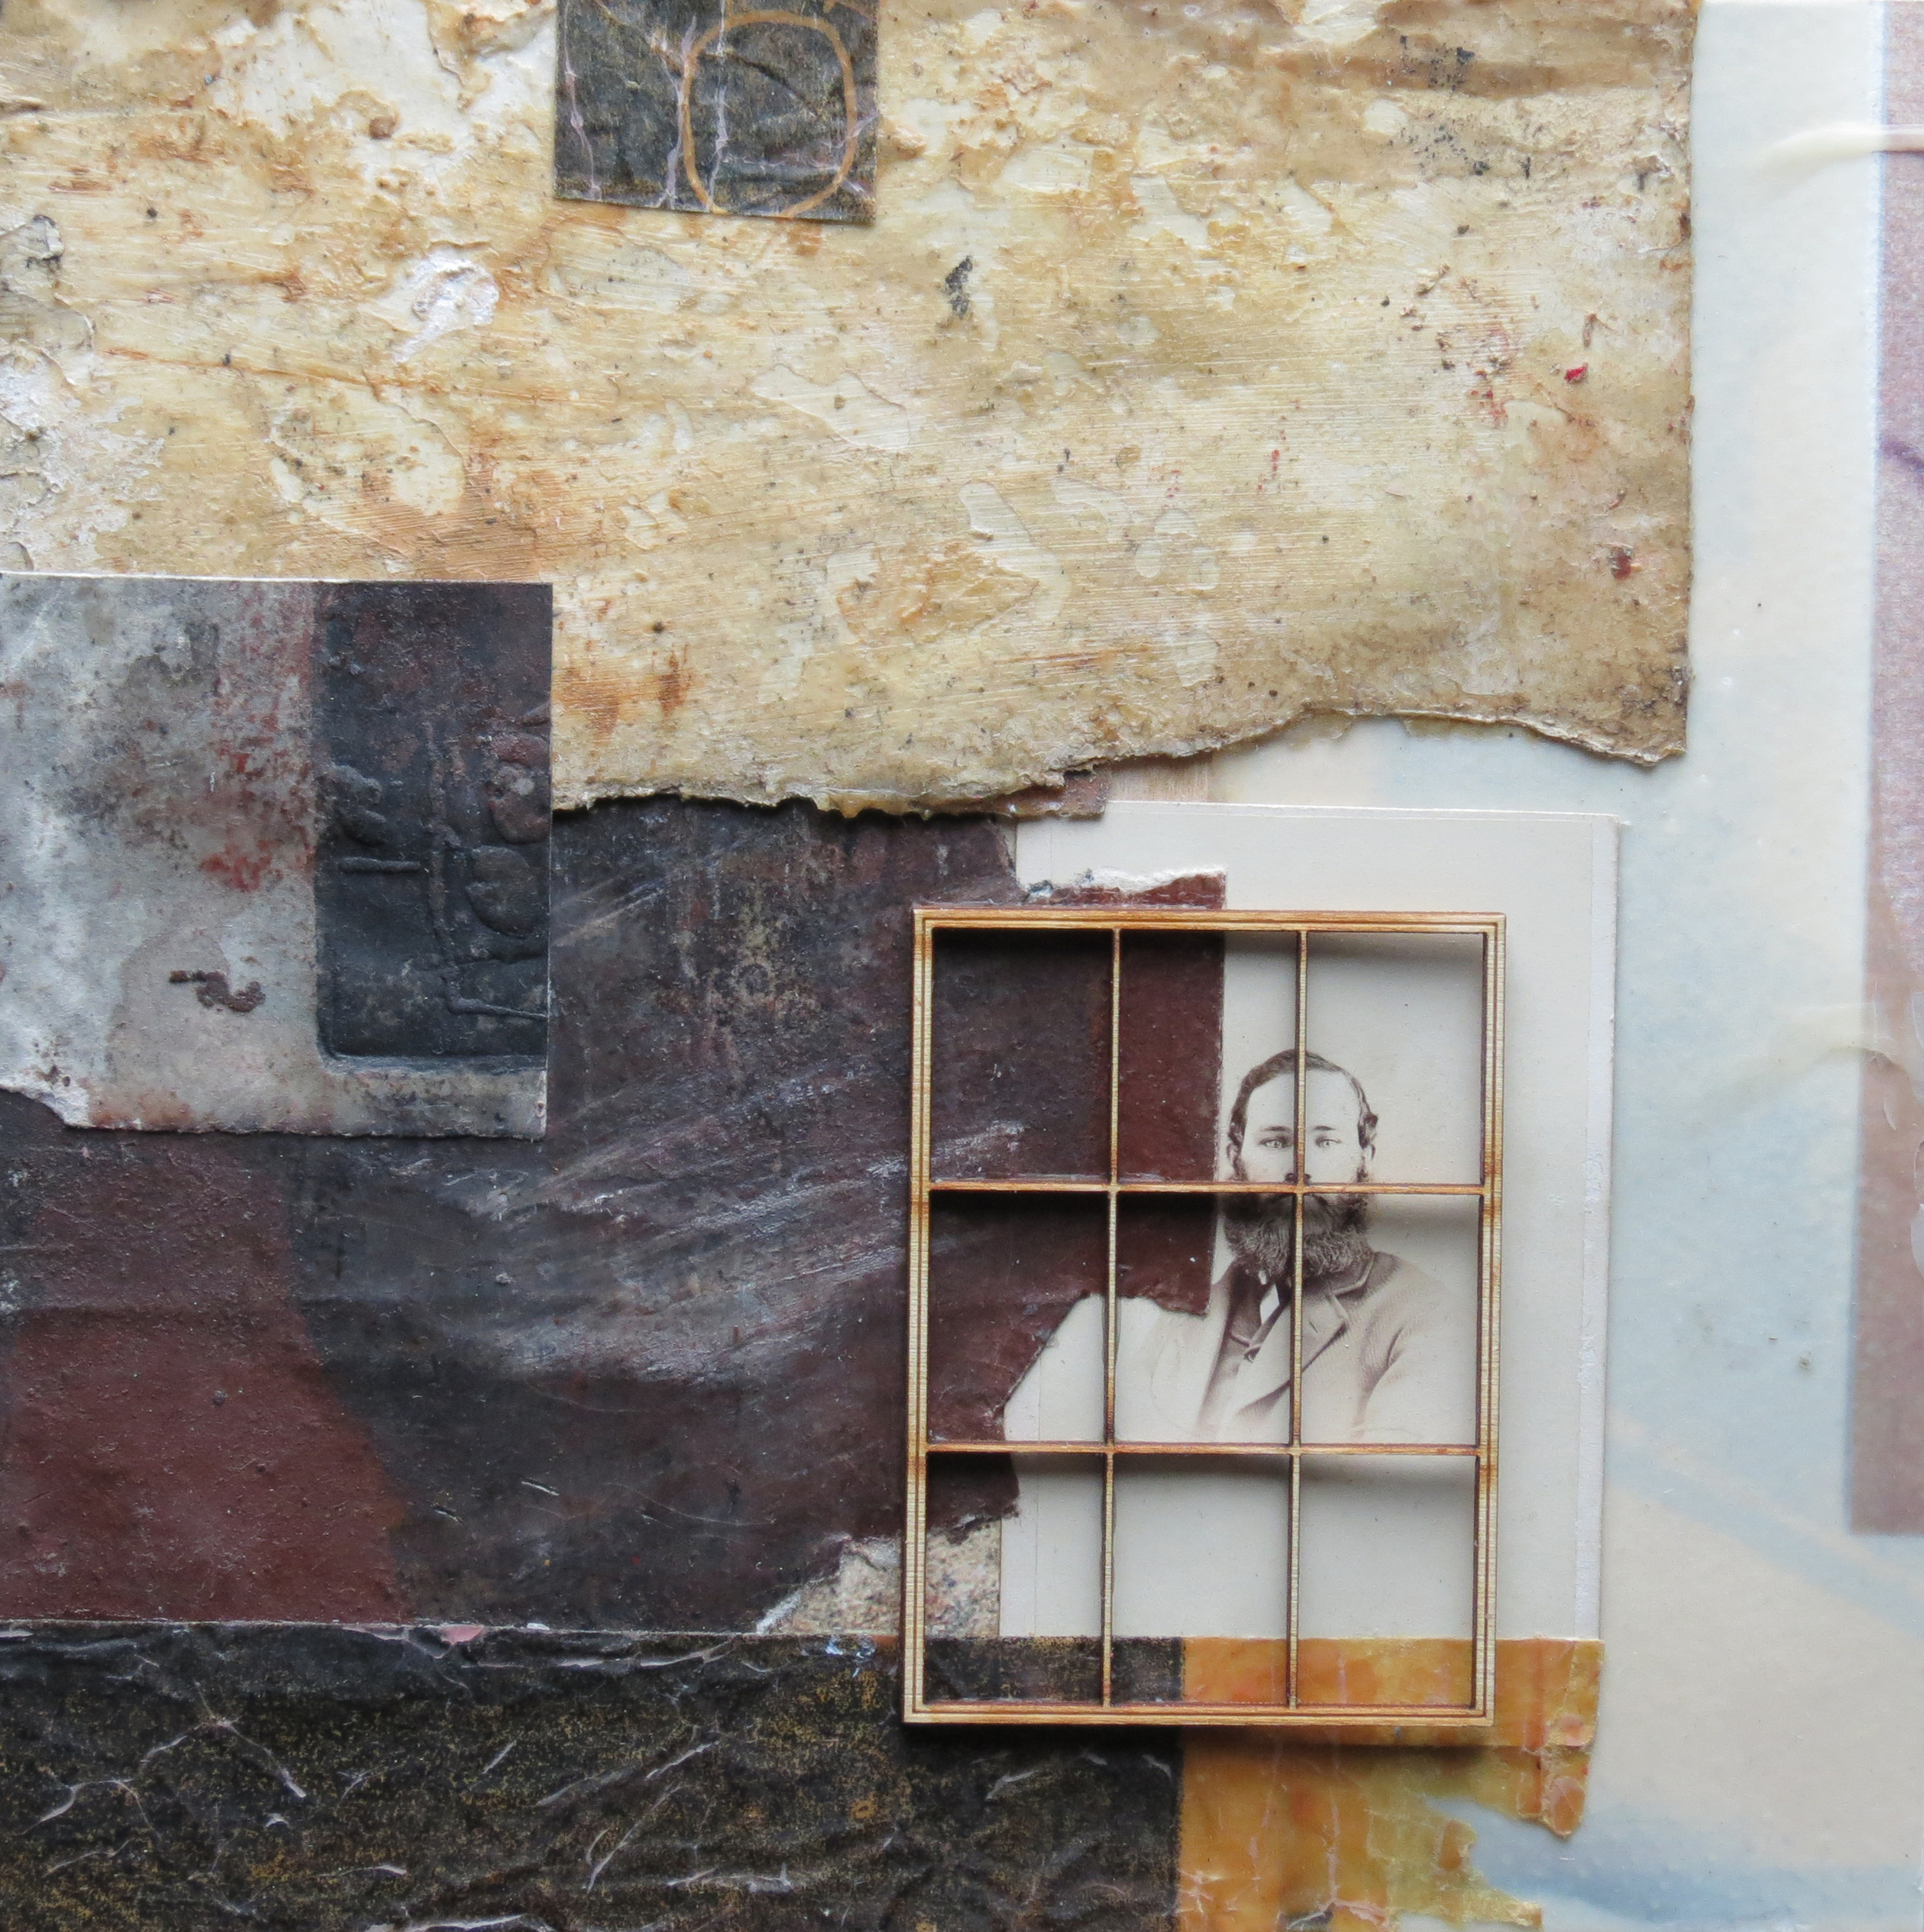  A mixed media collage by Clive Knights from 2014 